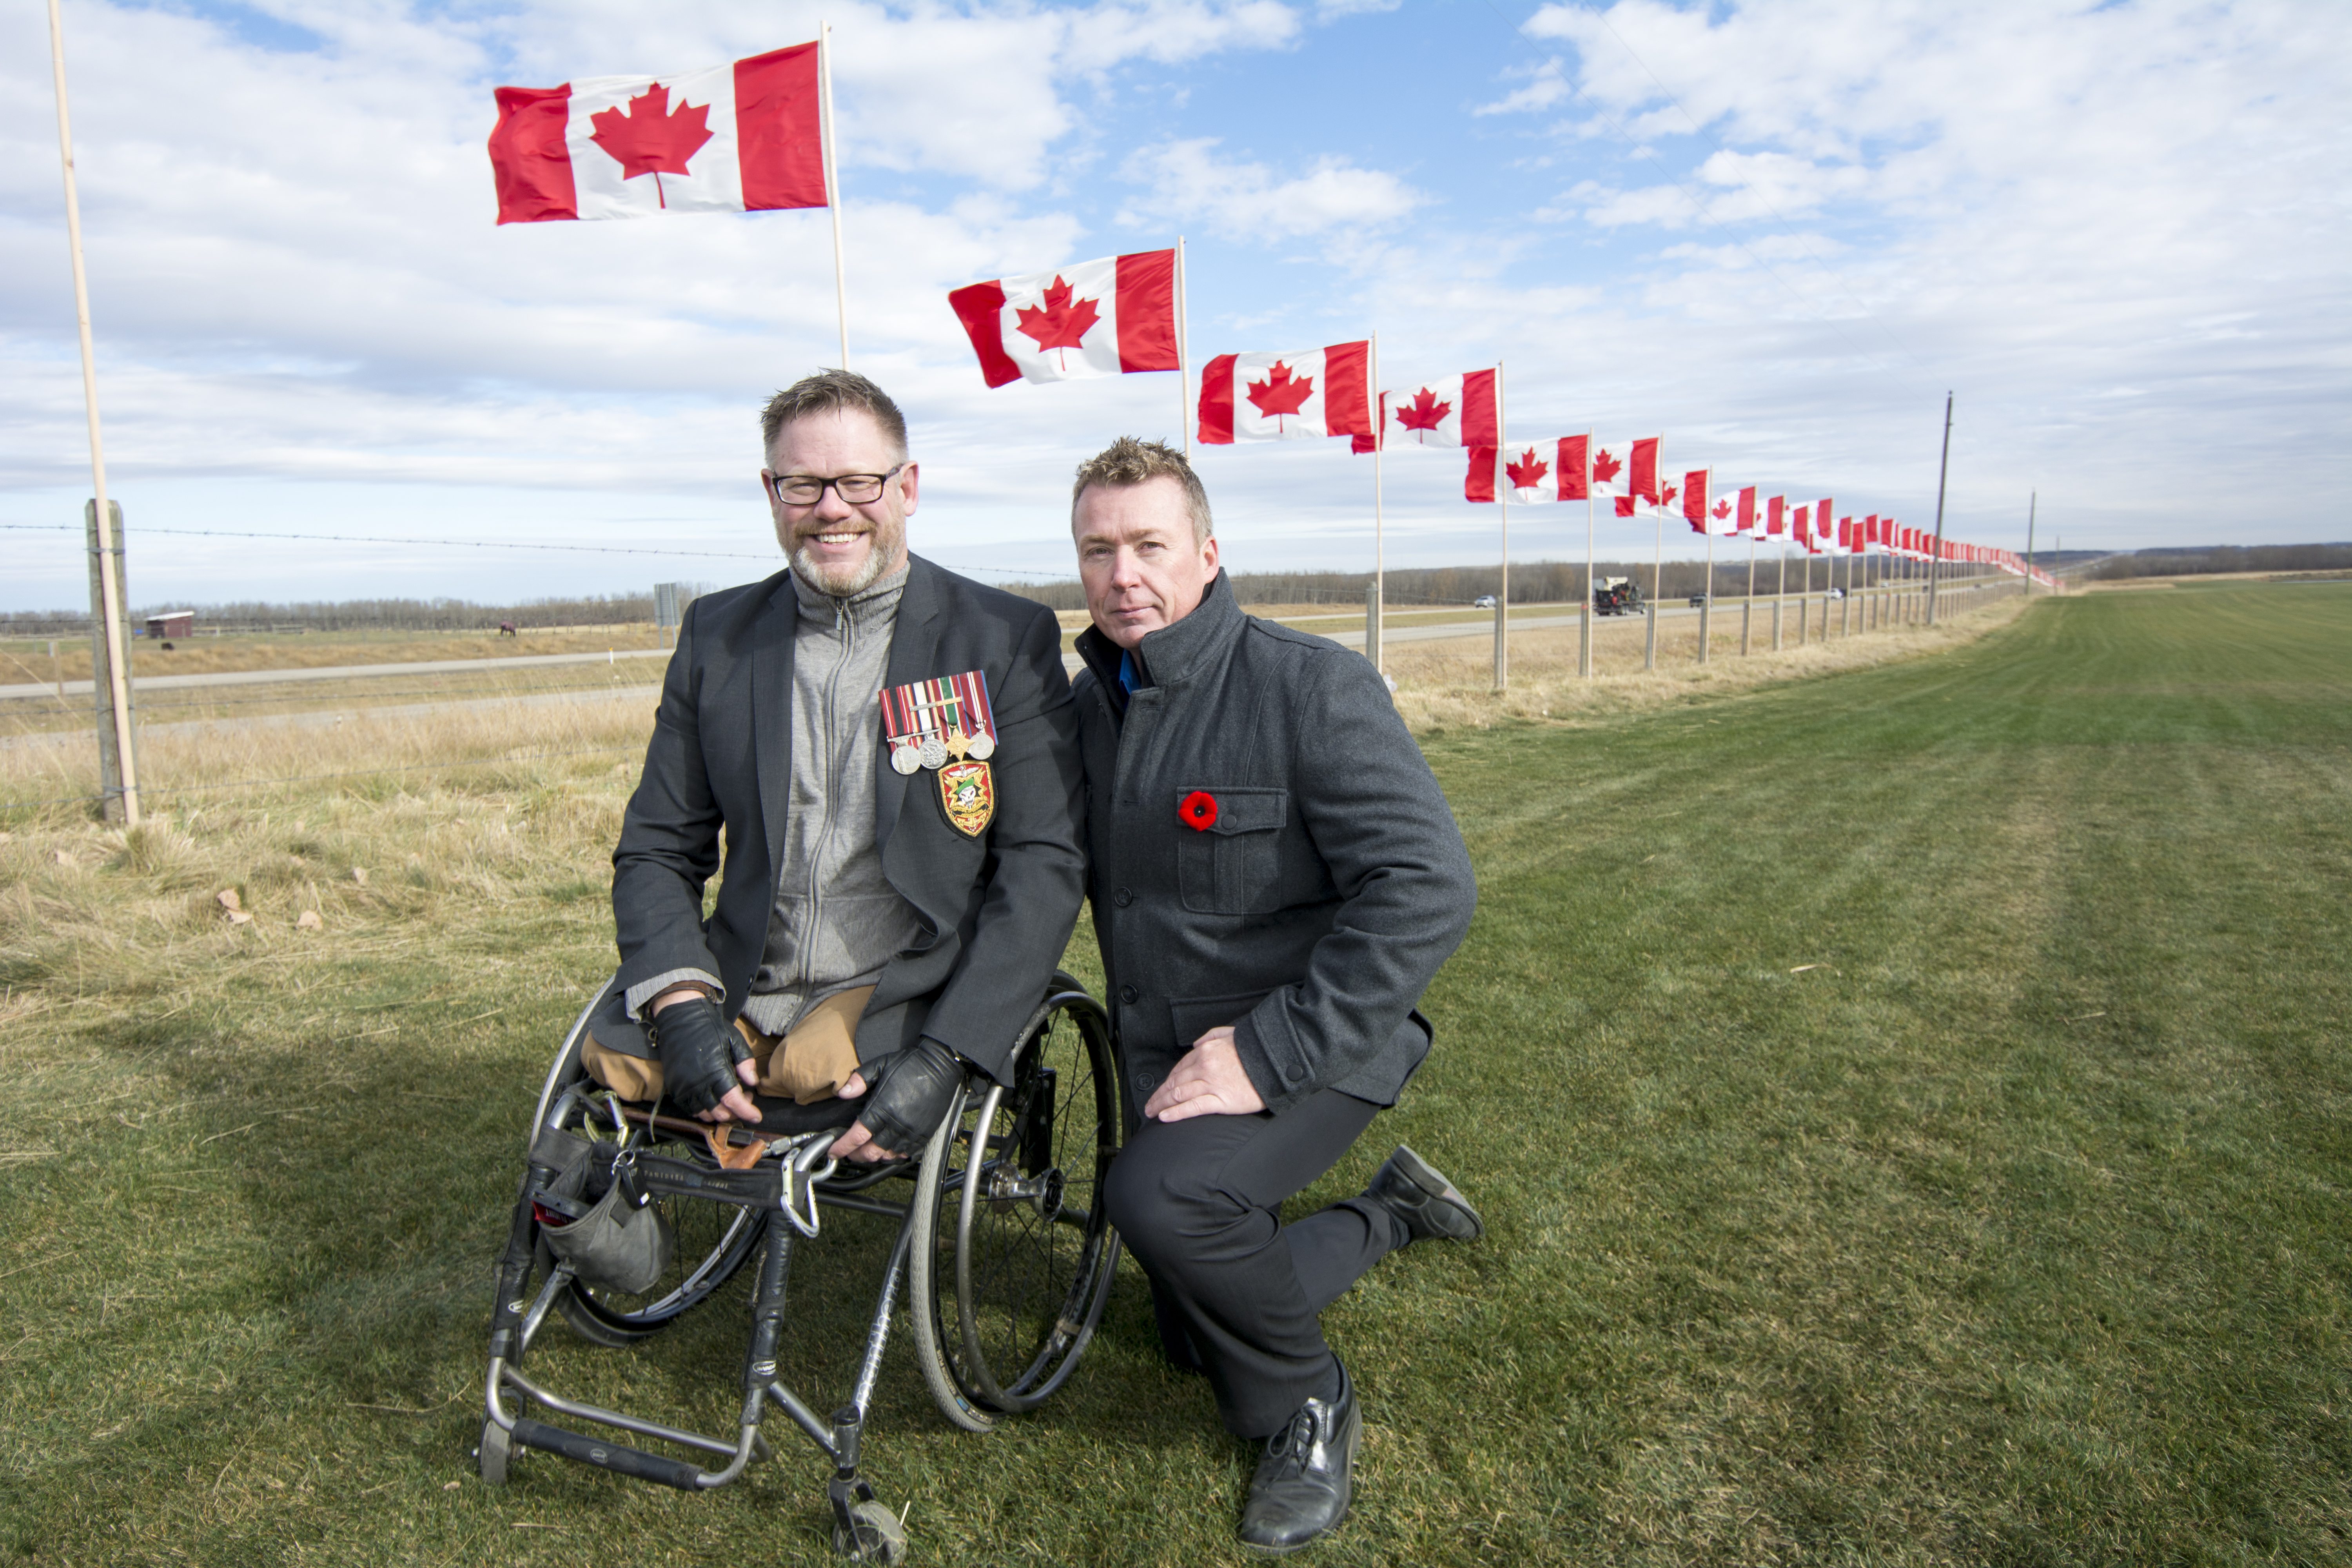 PATRIOTIC MOMENT – Retired Master Corporal Paul Franklin takes a moment to appreciate the work of Allan Cameron